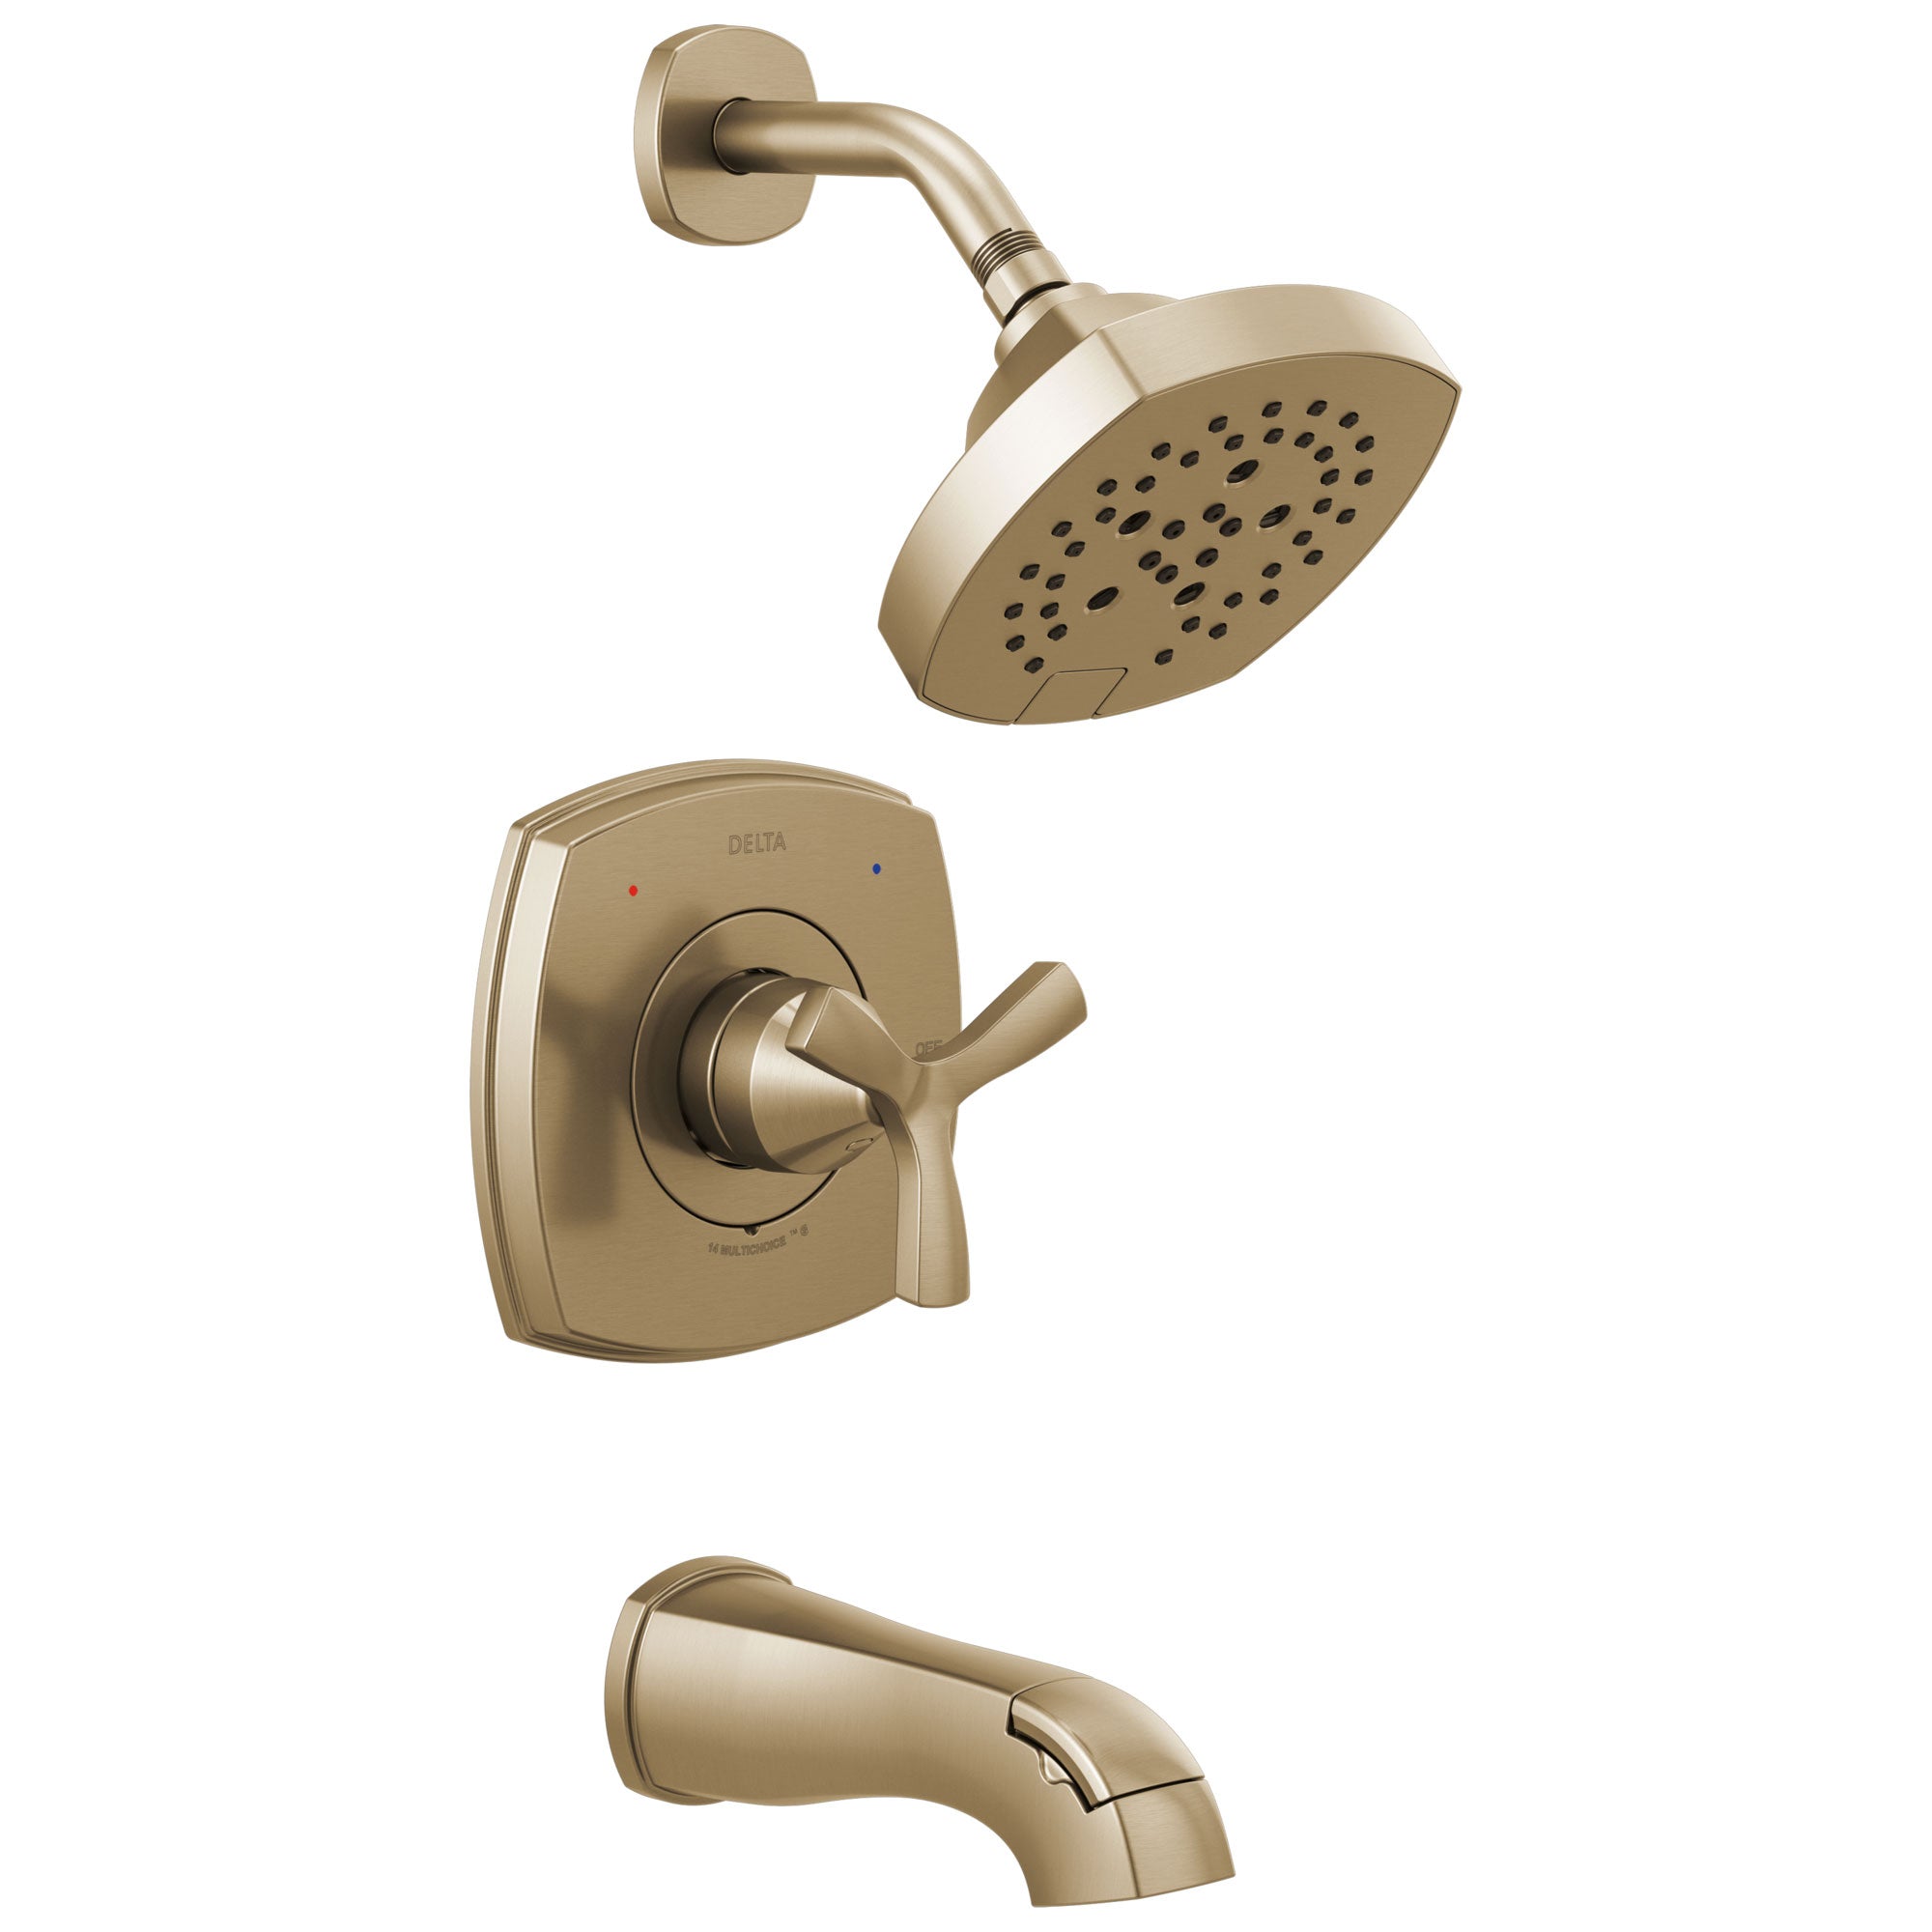 Delta Stryke Champagne Bronze Finish 14 Series Tub and Shower Combination Faucet Includes Helo Cross Handle, Cartridge, and Valve with Stops D3438V